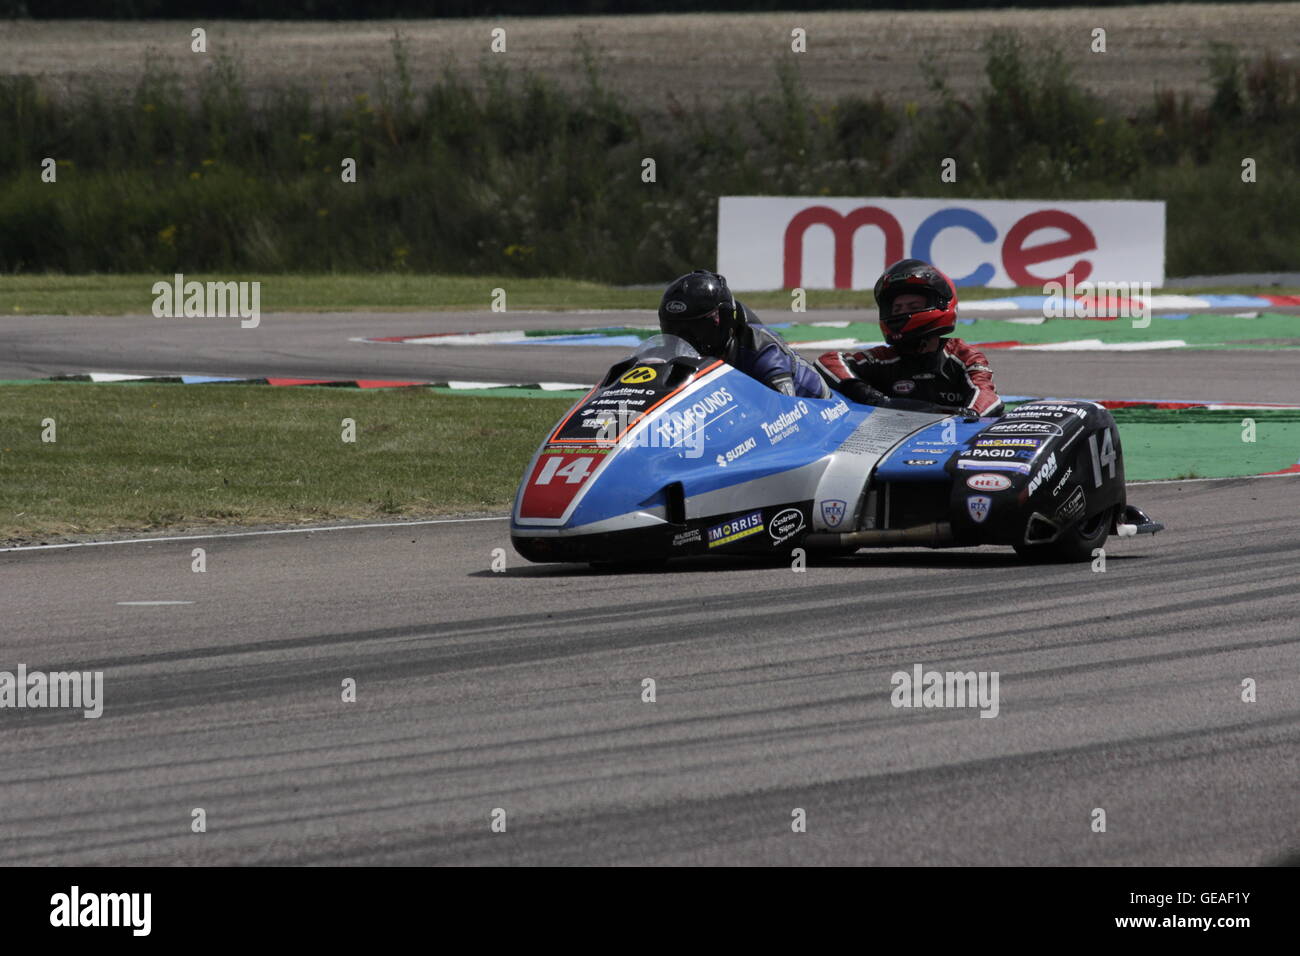 Alan Founds and Aki Alto riding in the qualifying rounds of the Hyundai Heavy Industries British Sidecars at Thruxton 23 July 2016. Stock Photo